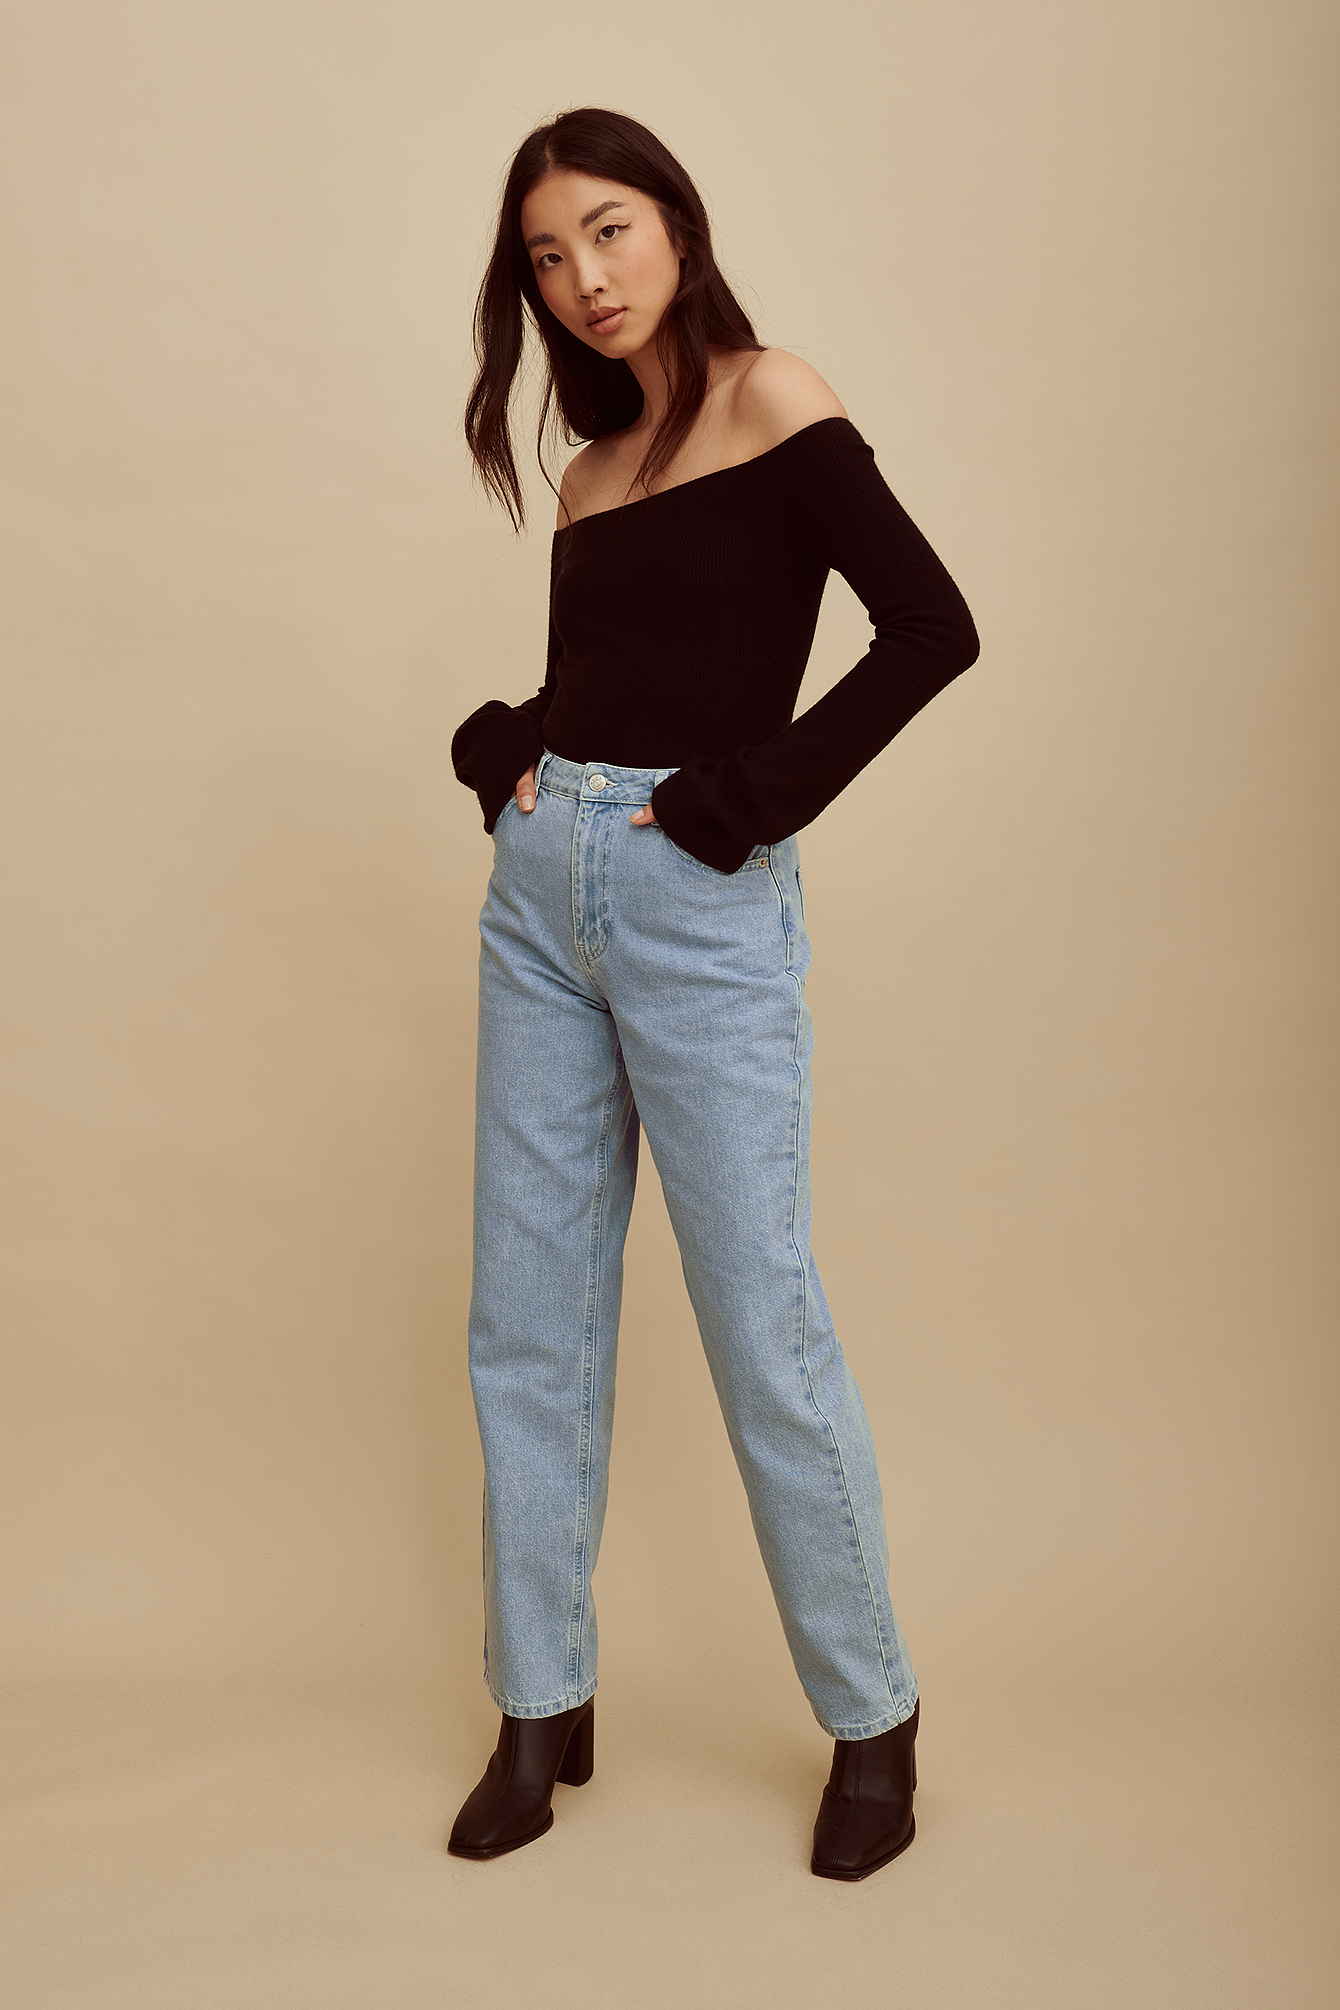 Contrast Stitch Jeans Outfit